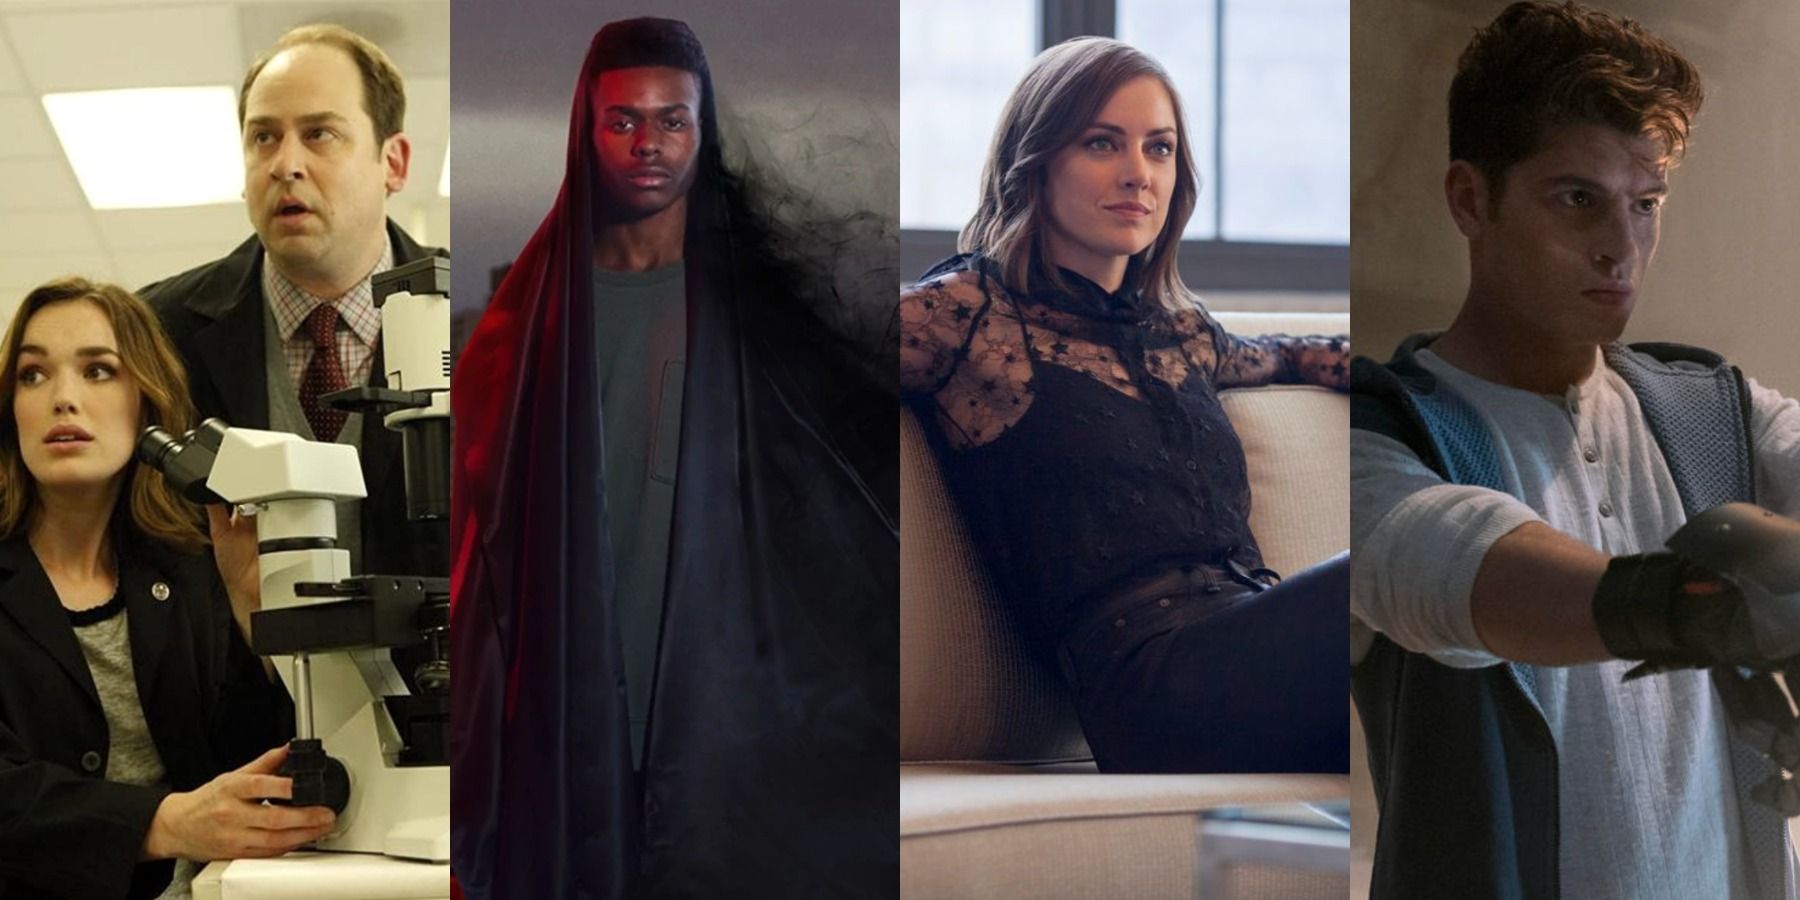 A split image depicts Jemma in Agents Of SHIELD, Ty in Cloak & Dagger, Joy in Iron Fist, and Chase in Runaways